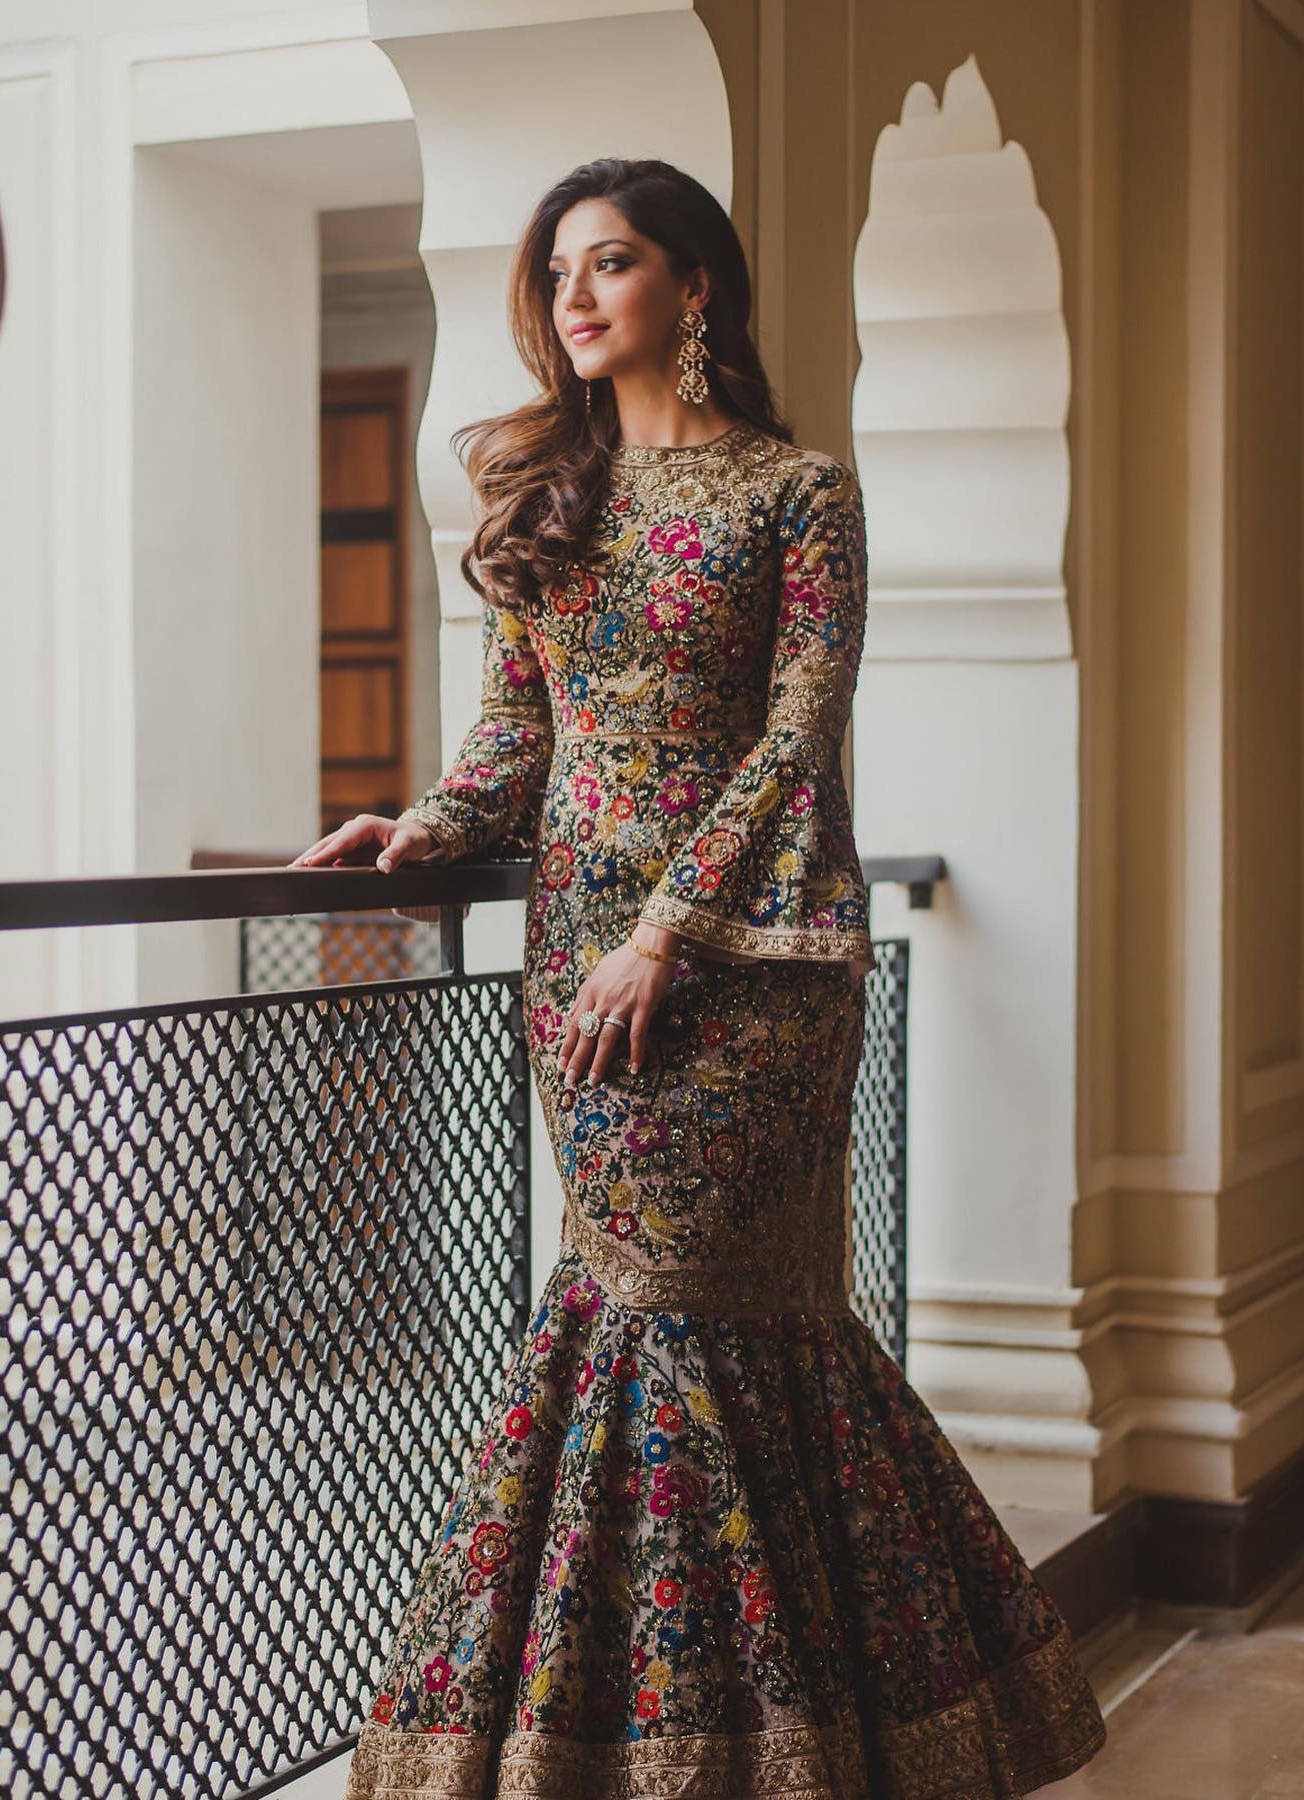 Gorgeous Mehreen Pirzada Floral Embroidered Long Mermaid Contemporary Dress Awestruck Looks & Glamorous Outfits